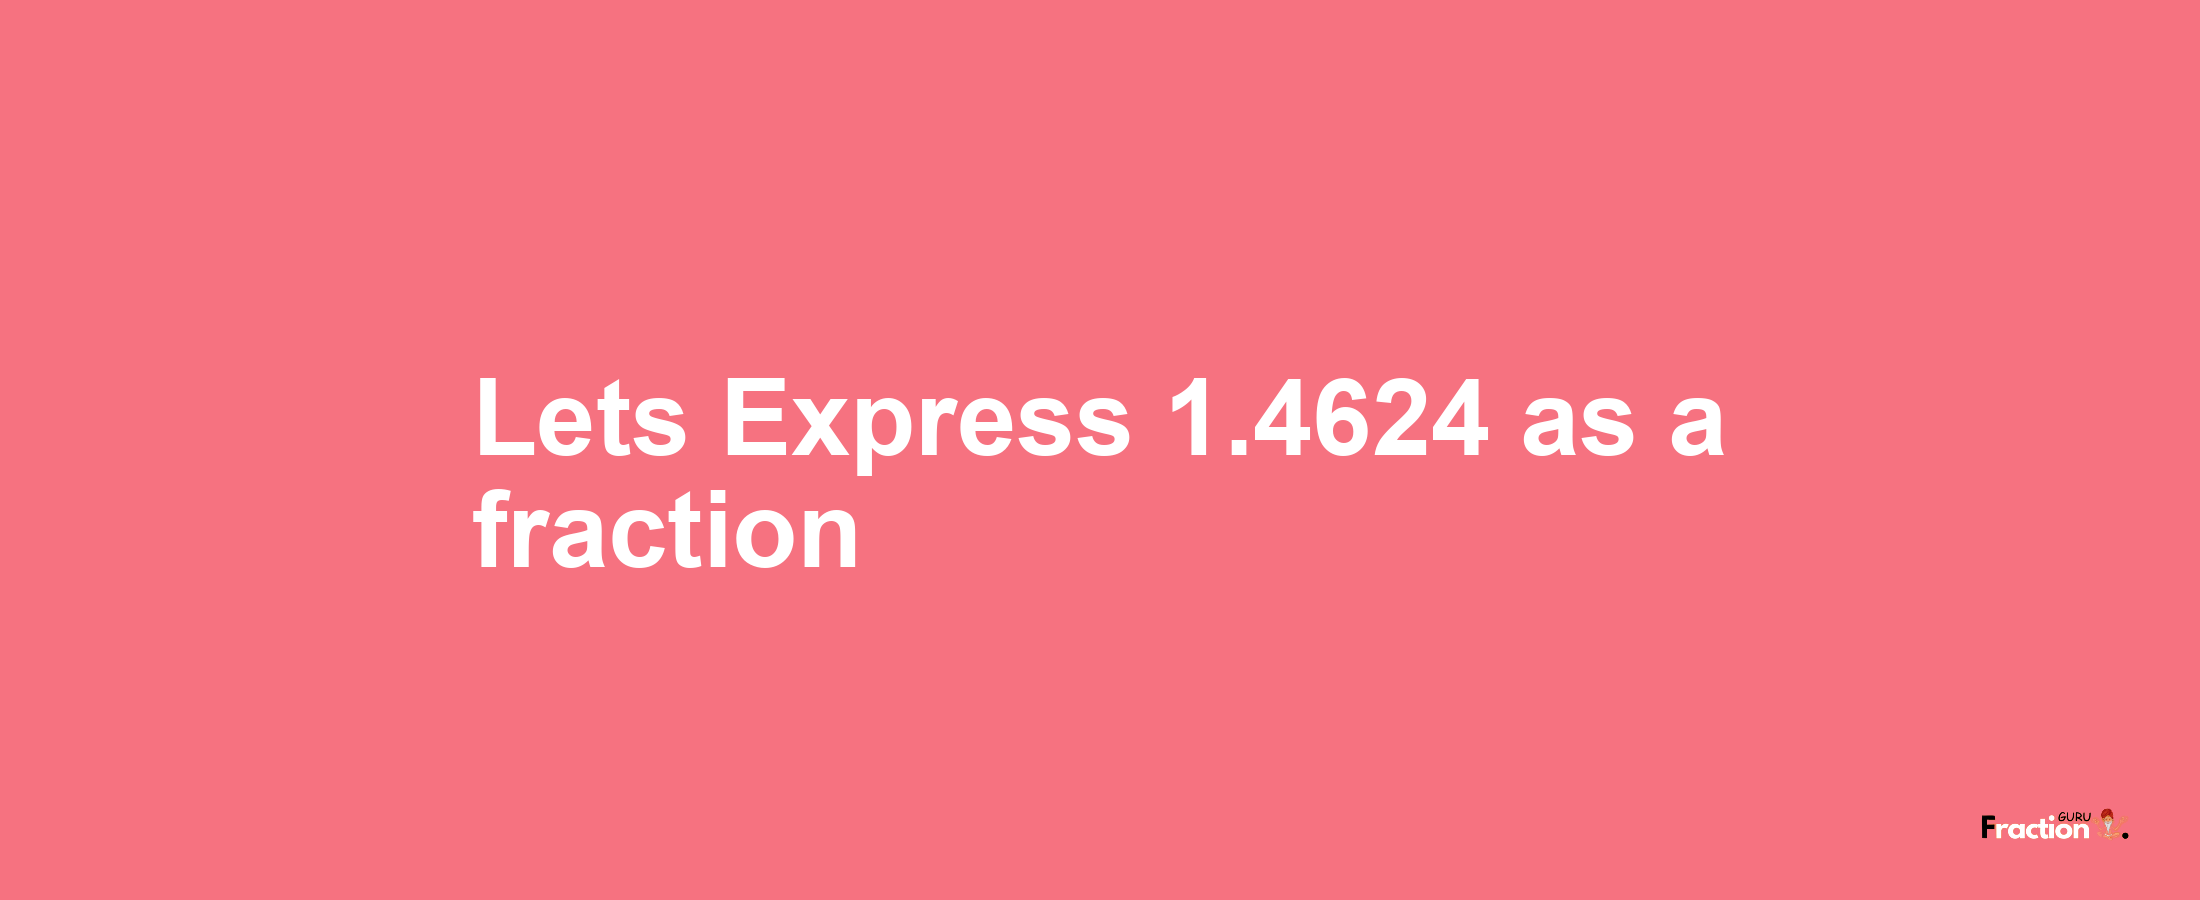 Lets Express 1.4624 as afraction